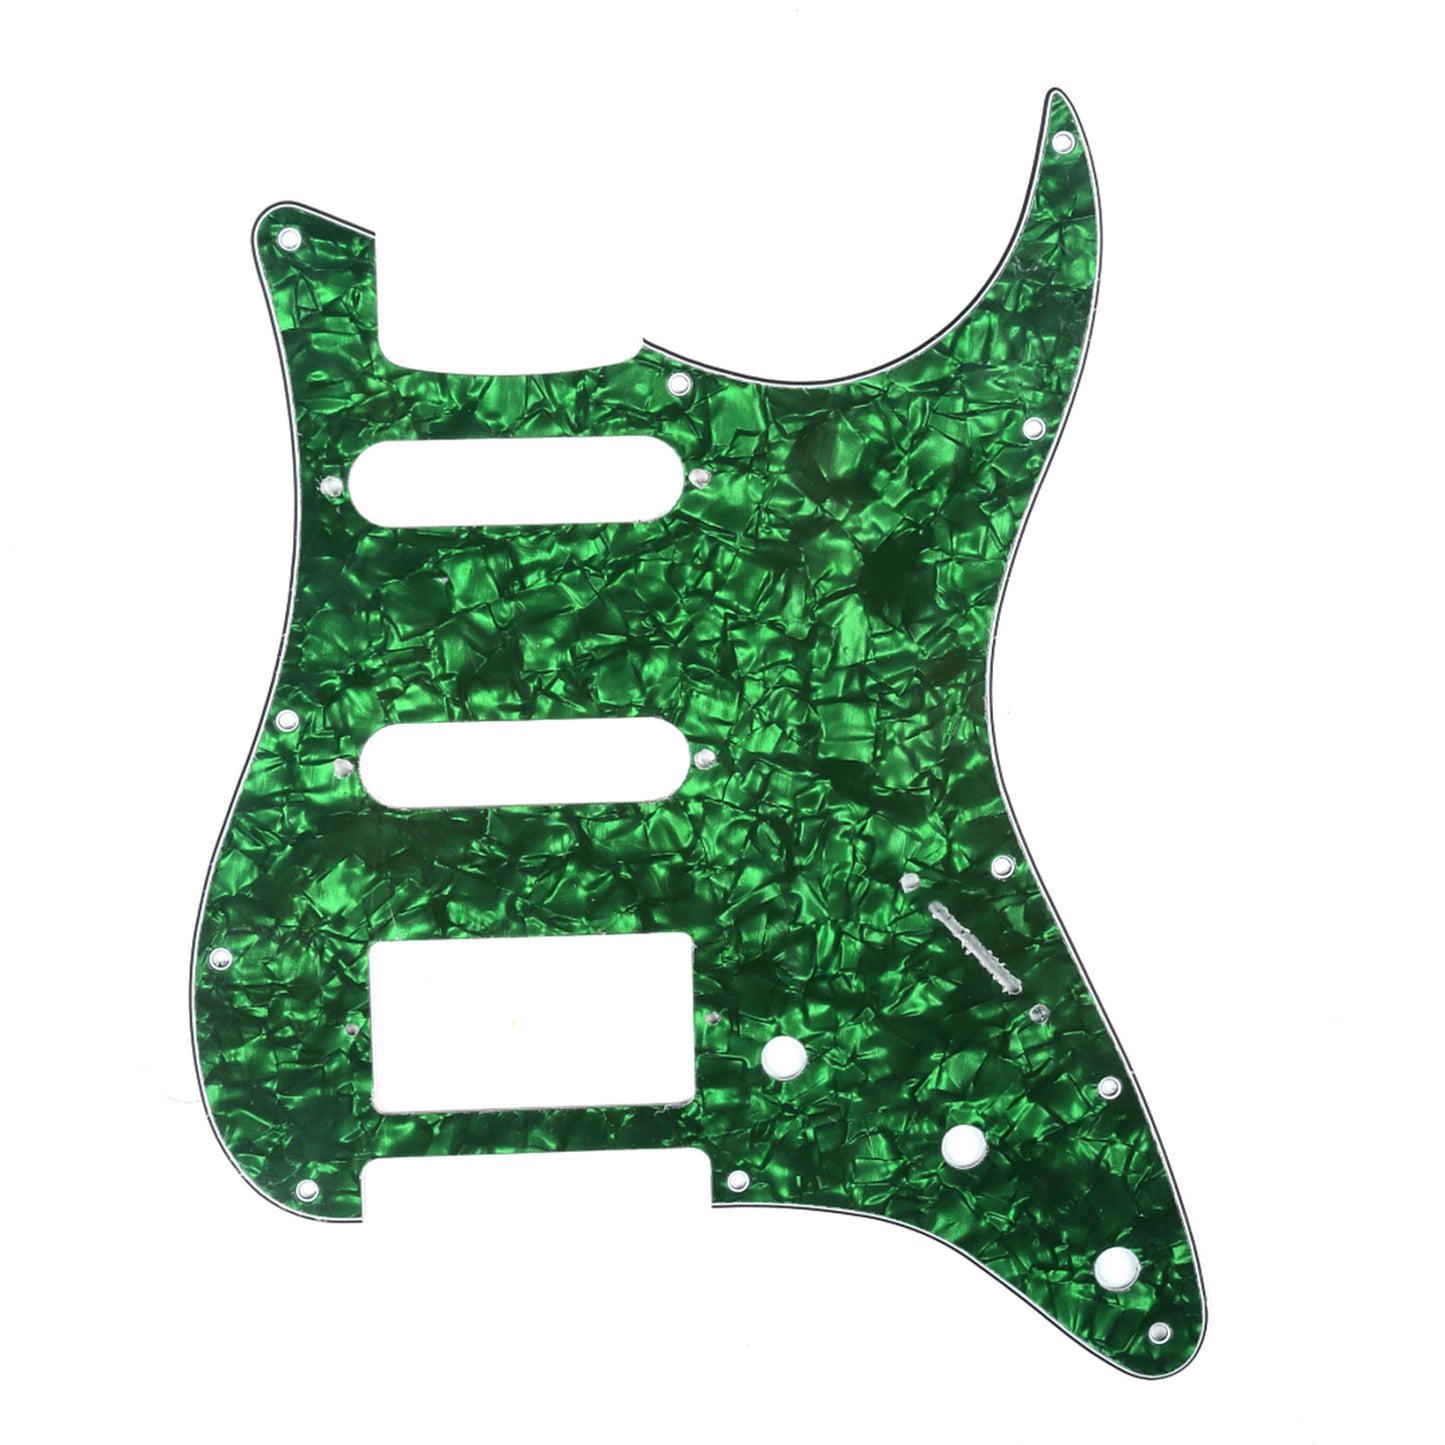 Musiclily HSS 11 Hole Guitar Strat Pickguard for Fender USA/Mexican Made Standard Stratocaster Modern Style, 4Ply Green Pearl